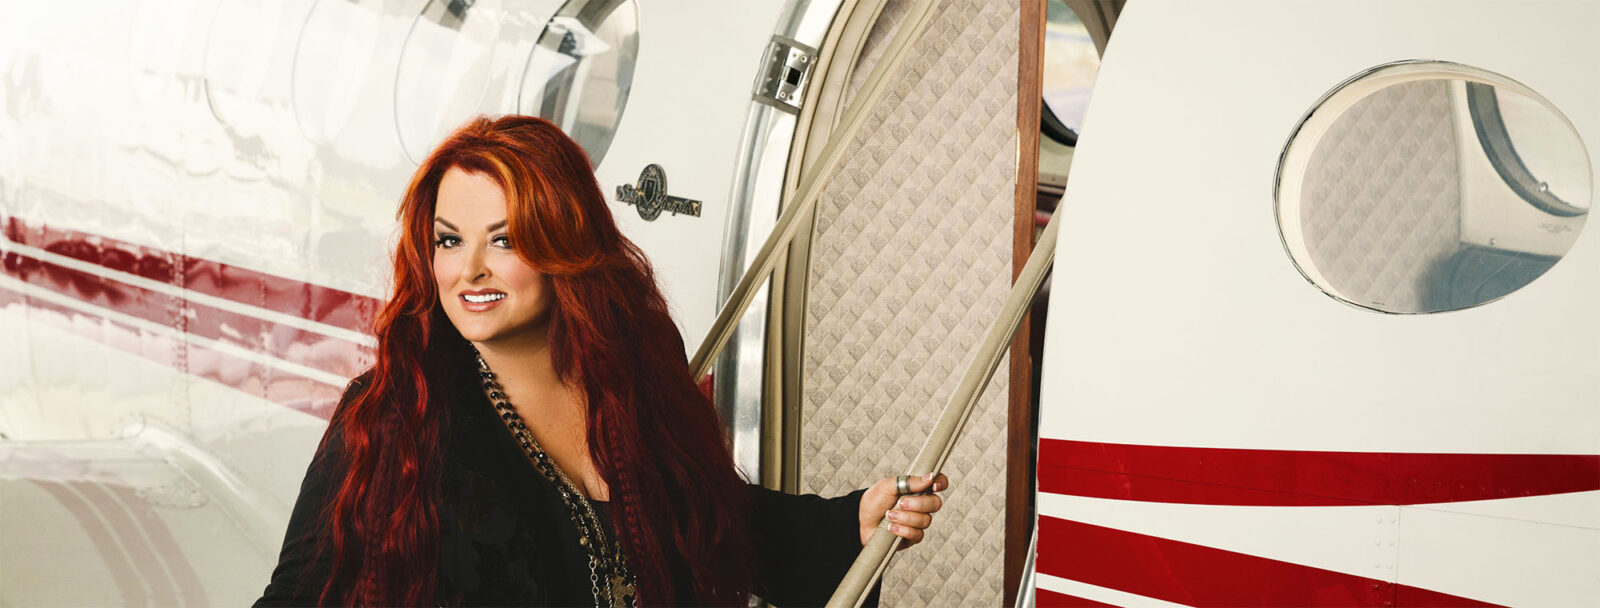 Wynonna, a red hair woman entering an airplane and smiling